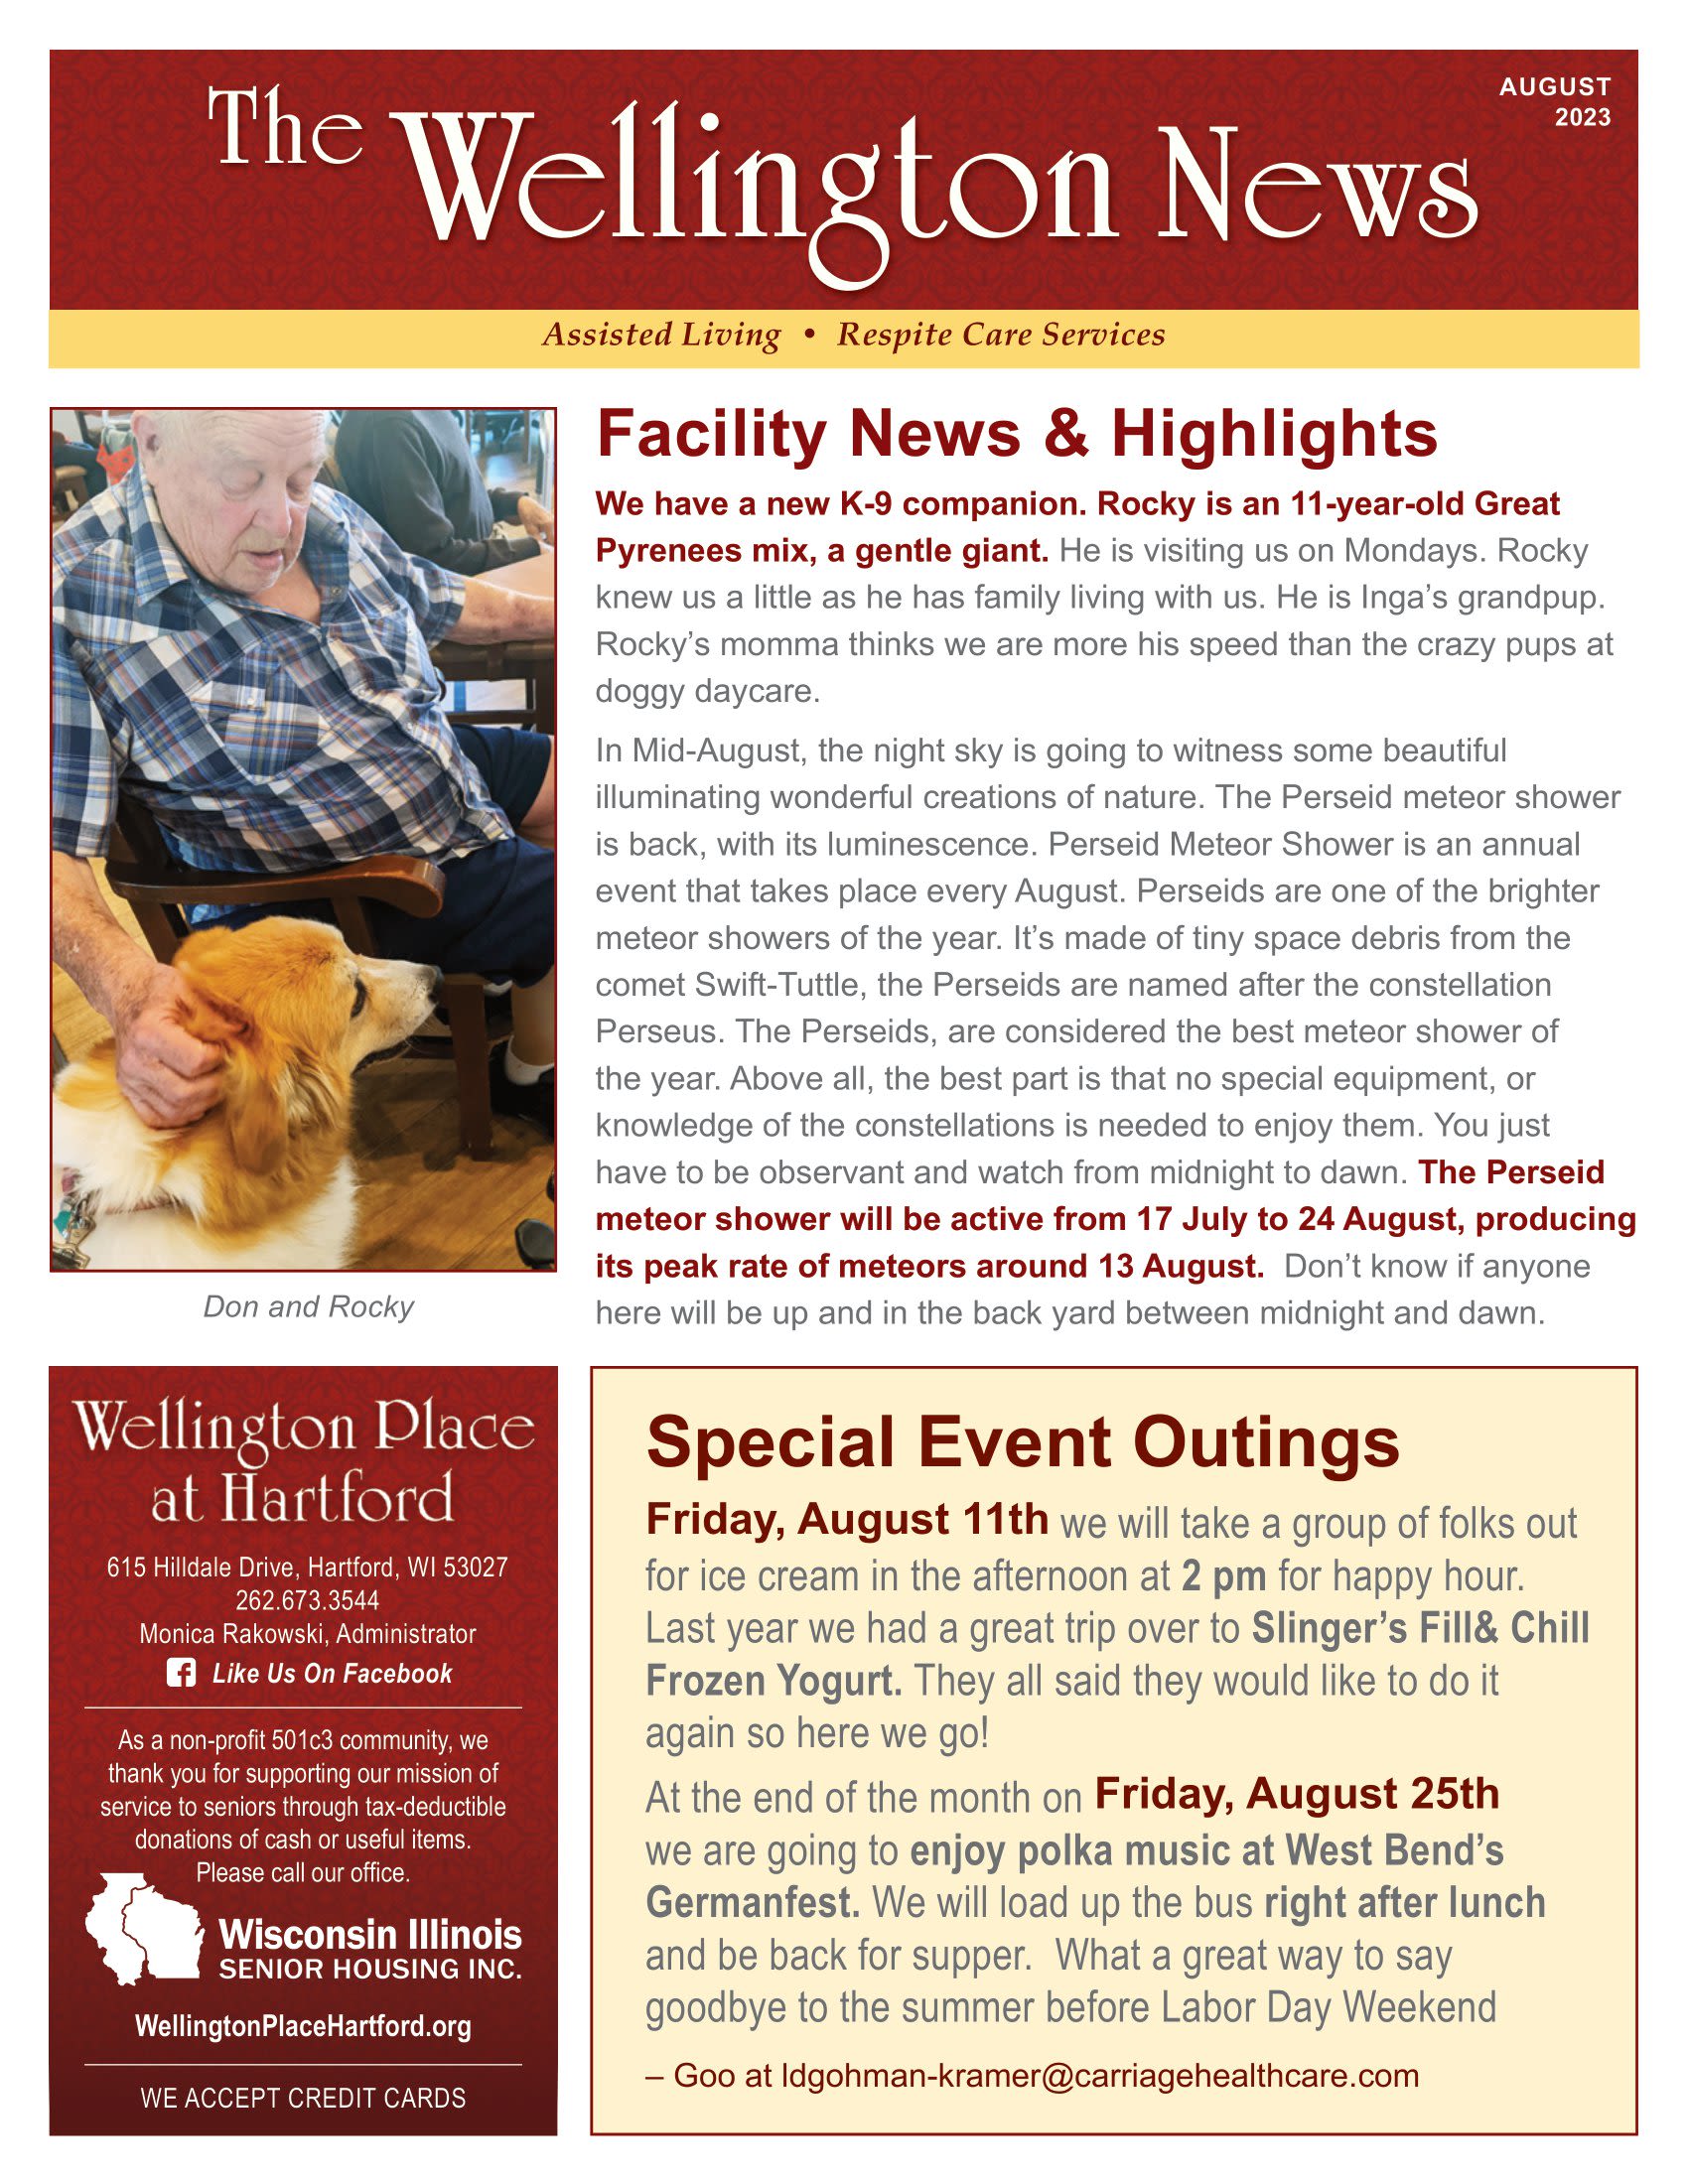 August 2023 Newsletter at Wellington Place at Hartford in Hartford, Wisconsin